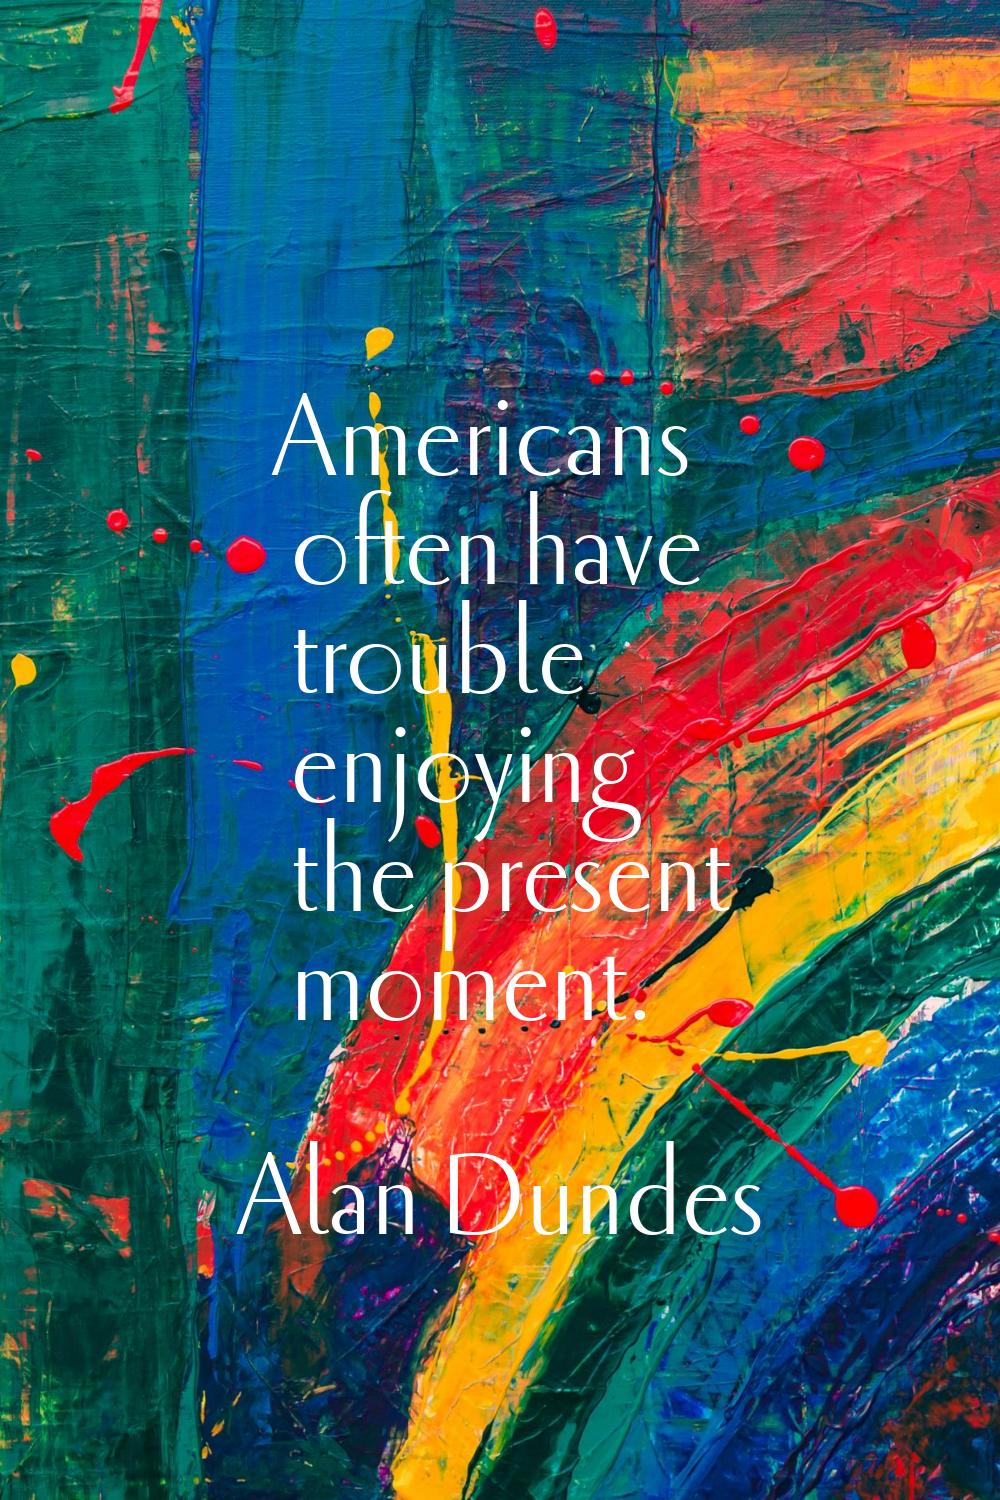 Americans often have trouble enjoying the present moment.